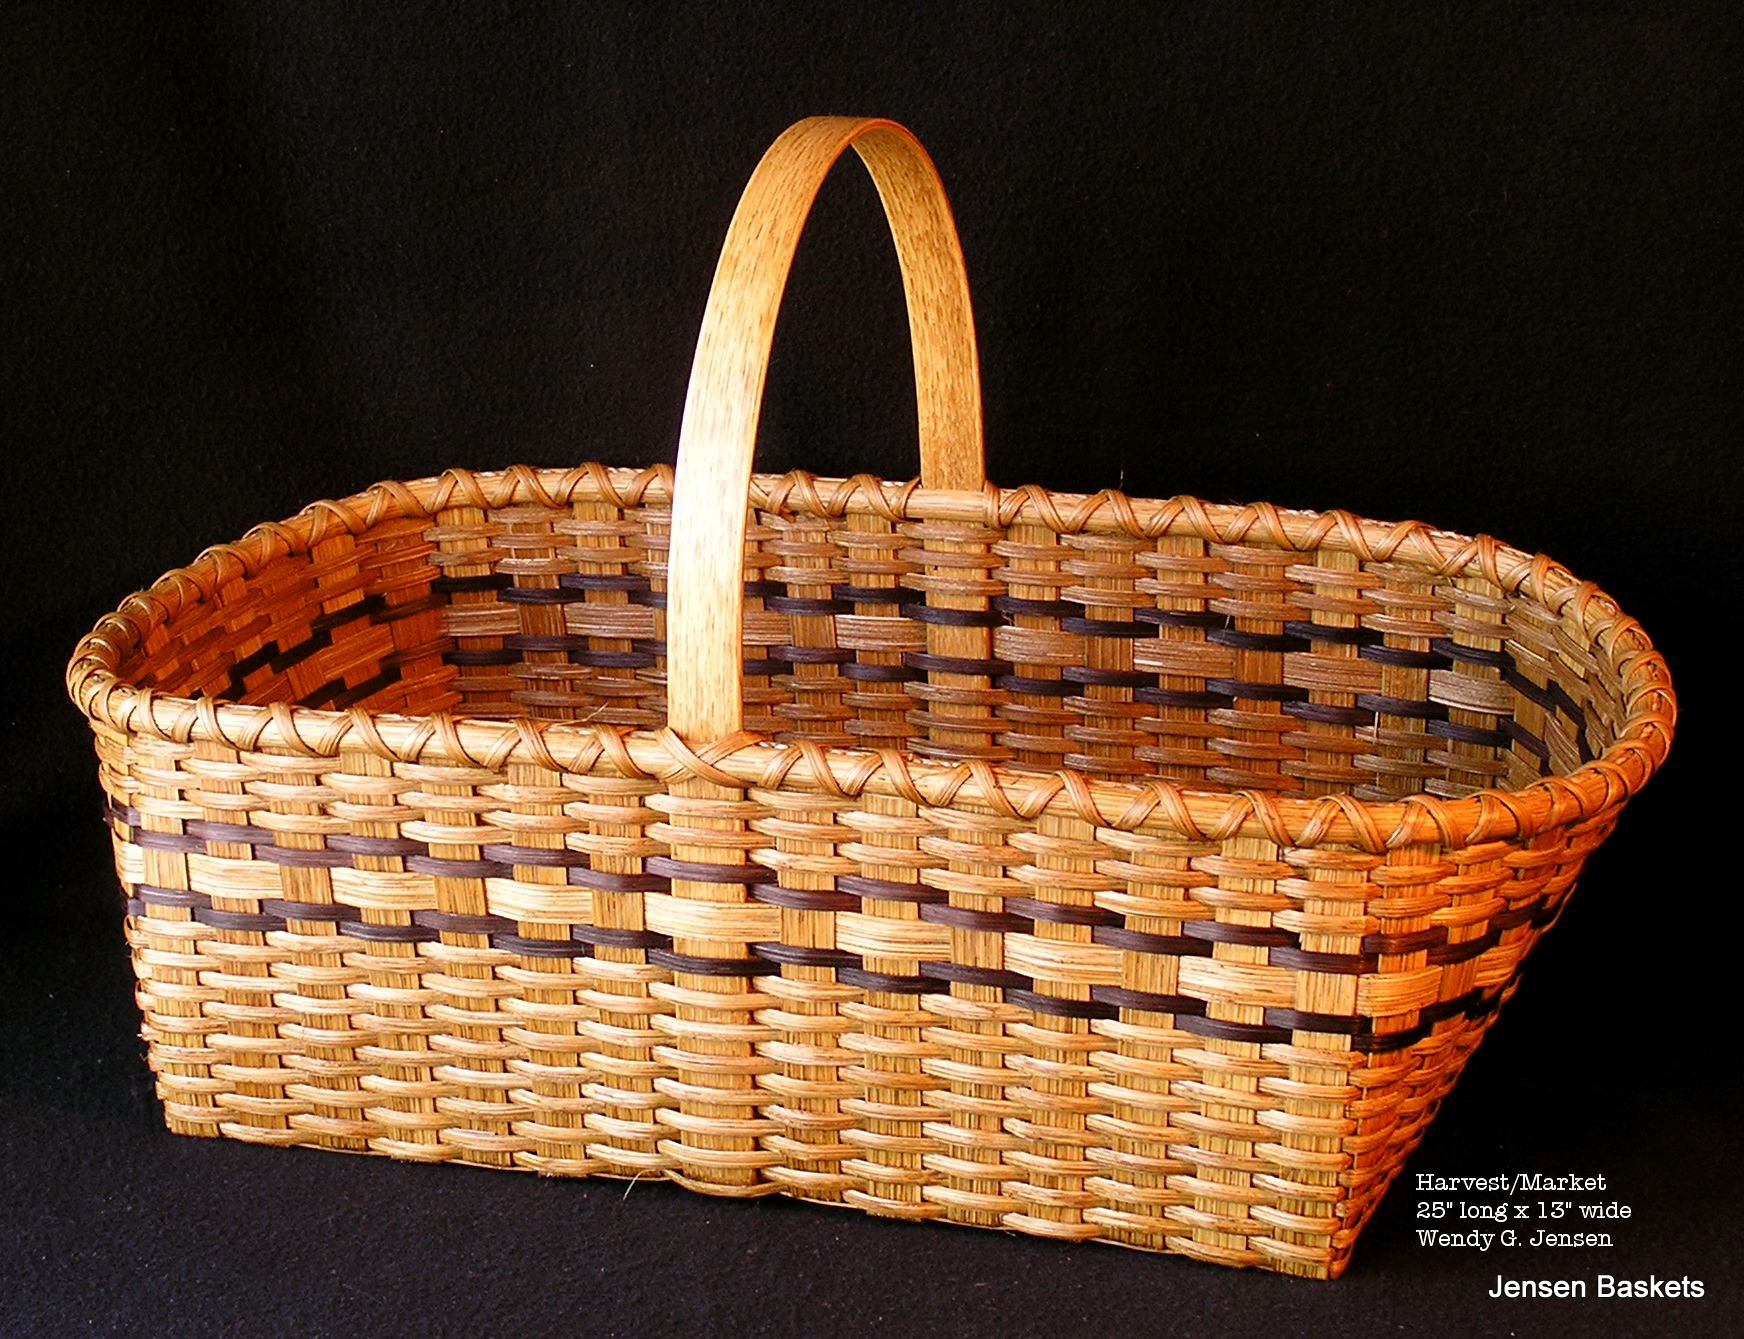 A wicker basket with handles on a black background.